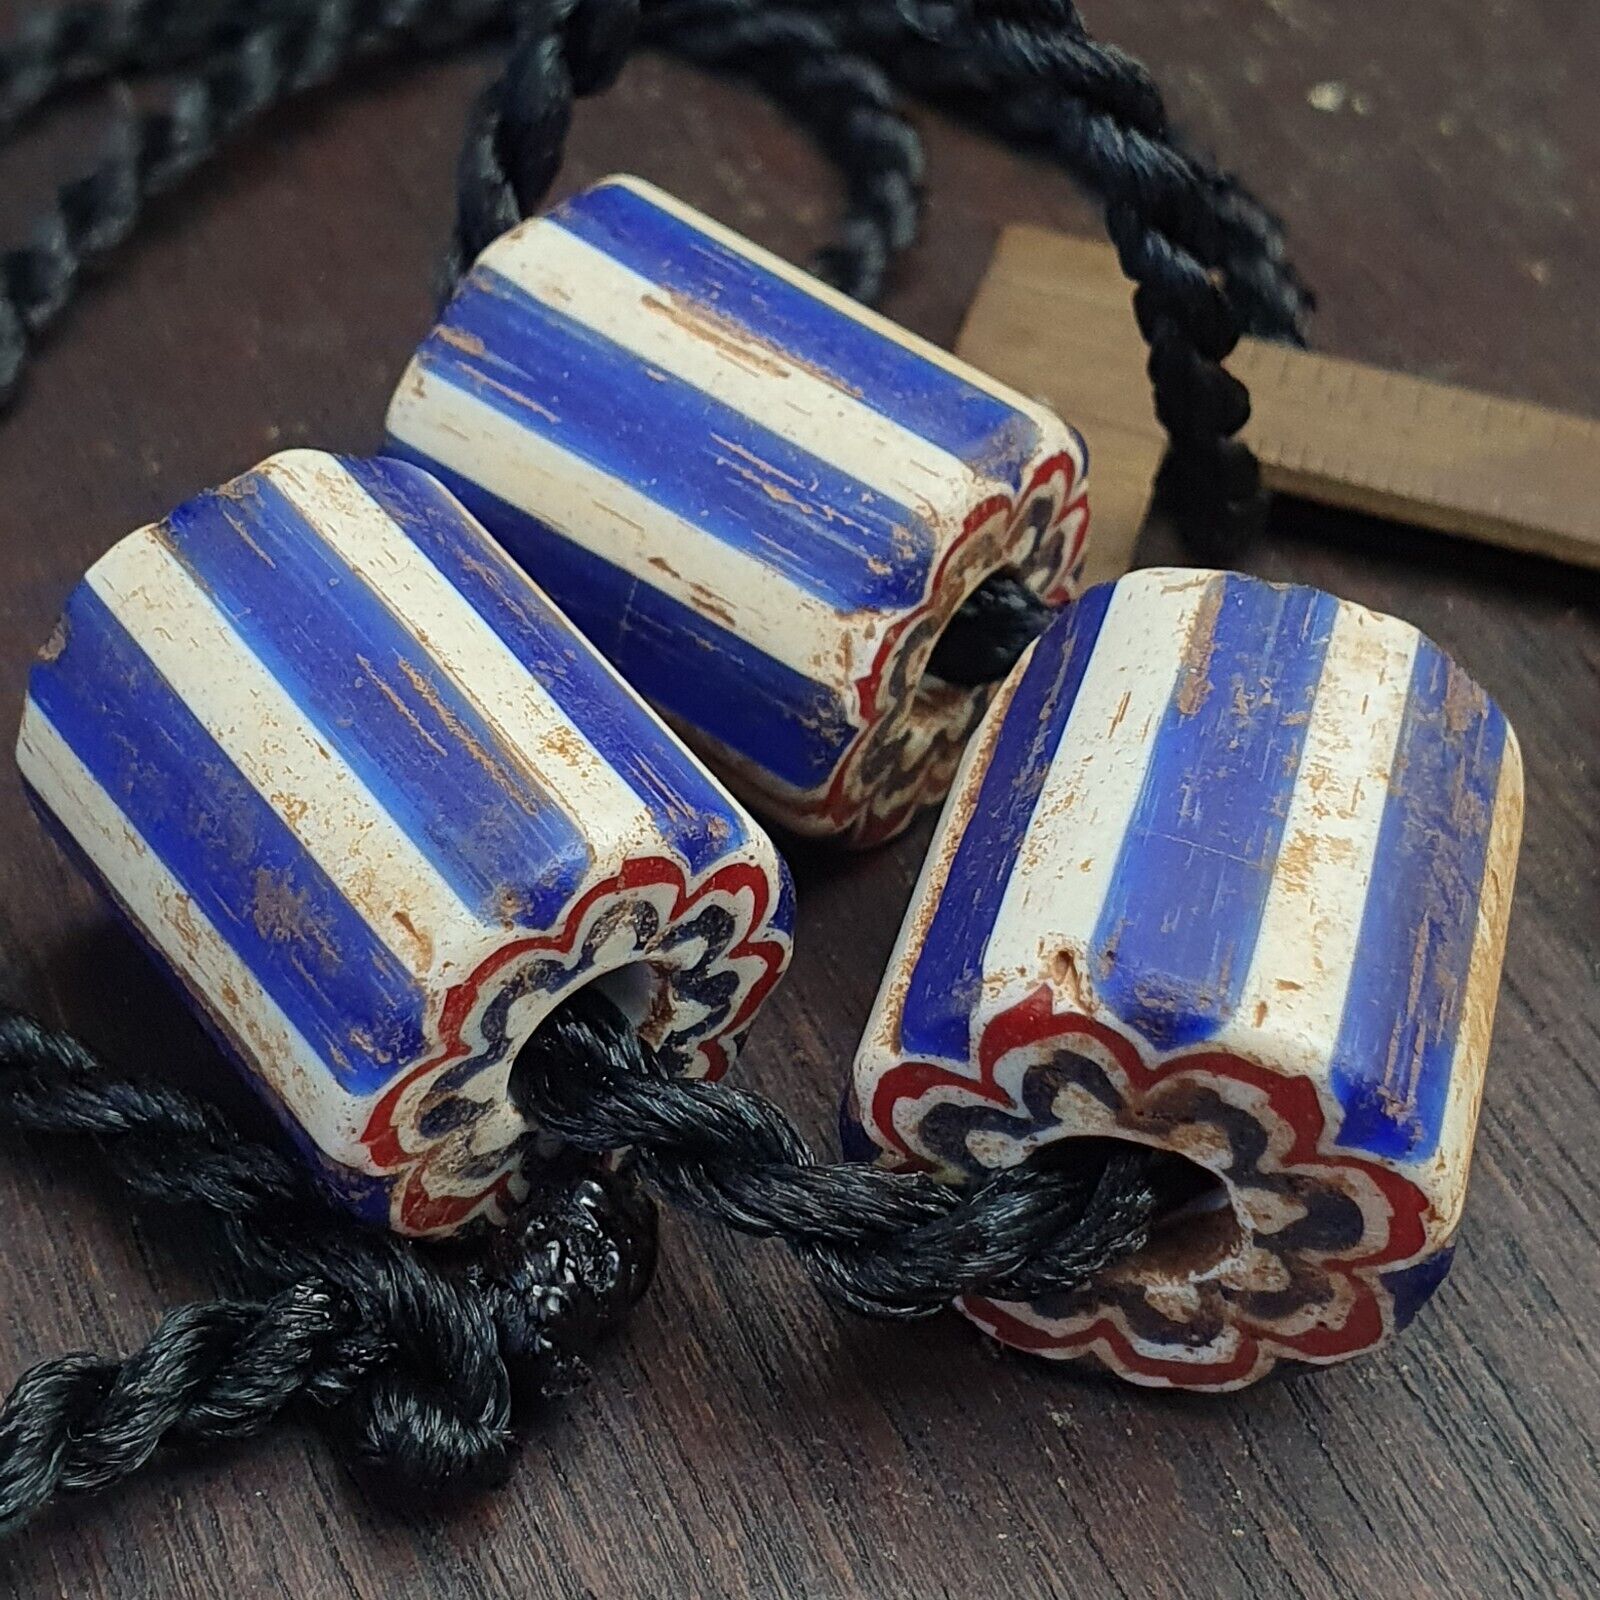 "Image of 3 antique Venetian trade beads, African blue glass chevron beads with large holes, showcasing a rare and vintage find, perfect for jewelry making, collectors, and enthusiasts of African and Venetian cultural heritage."